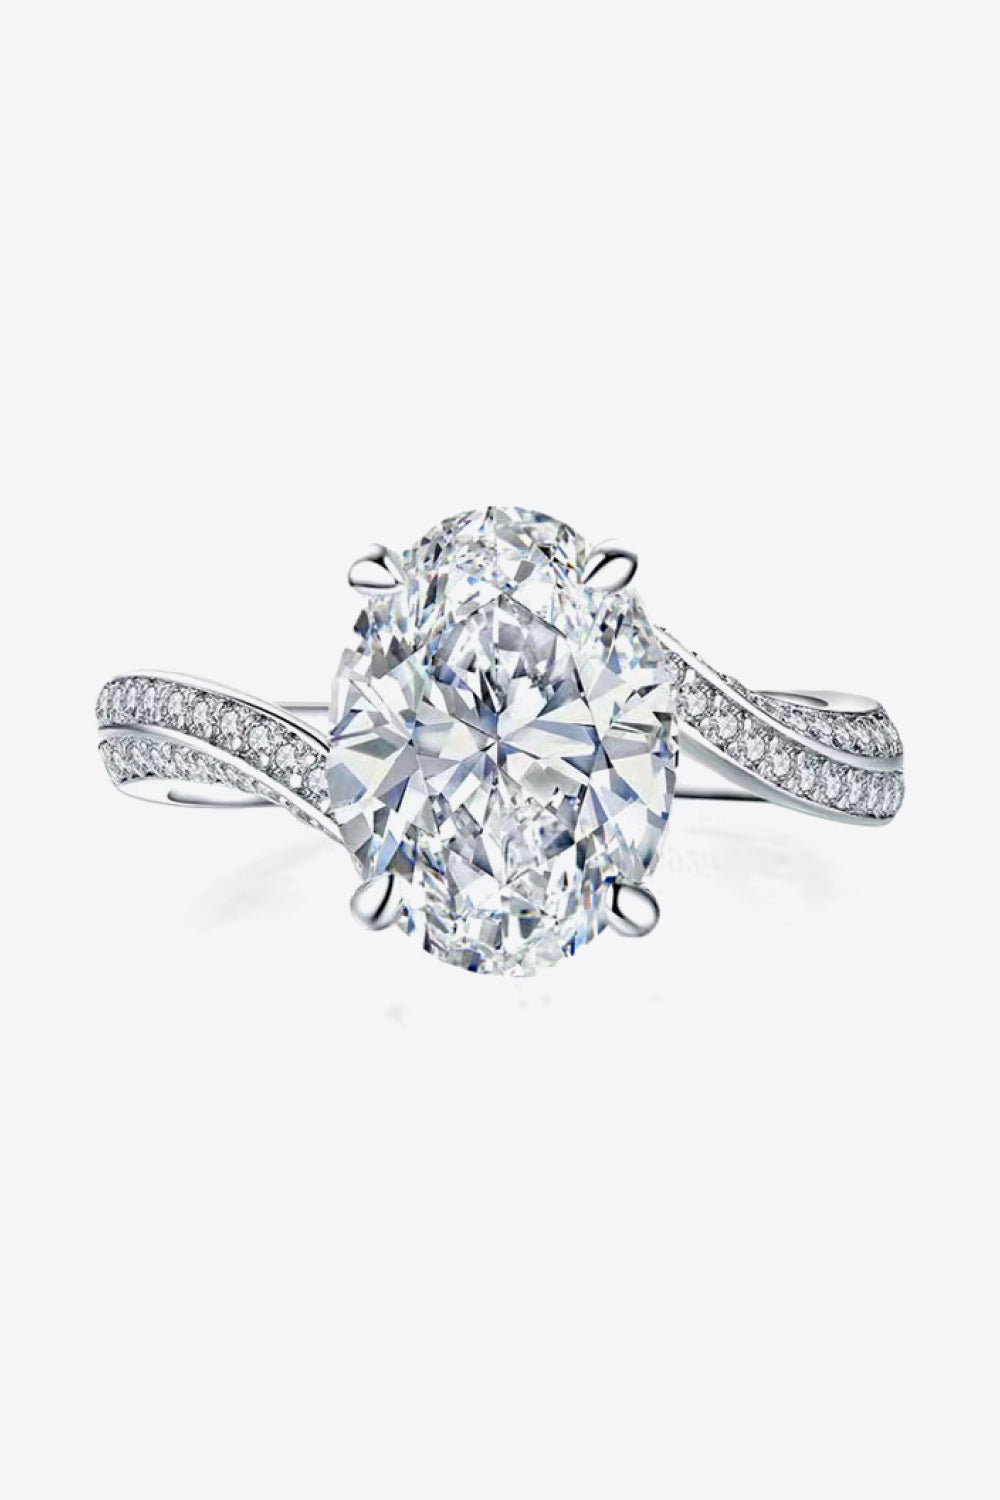 3 Carat Oval-Cut Moissanite Side Stone Ring (Platinum Over Pure Sterling Silver) - Sparkala